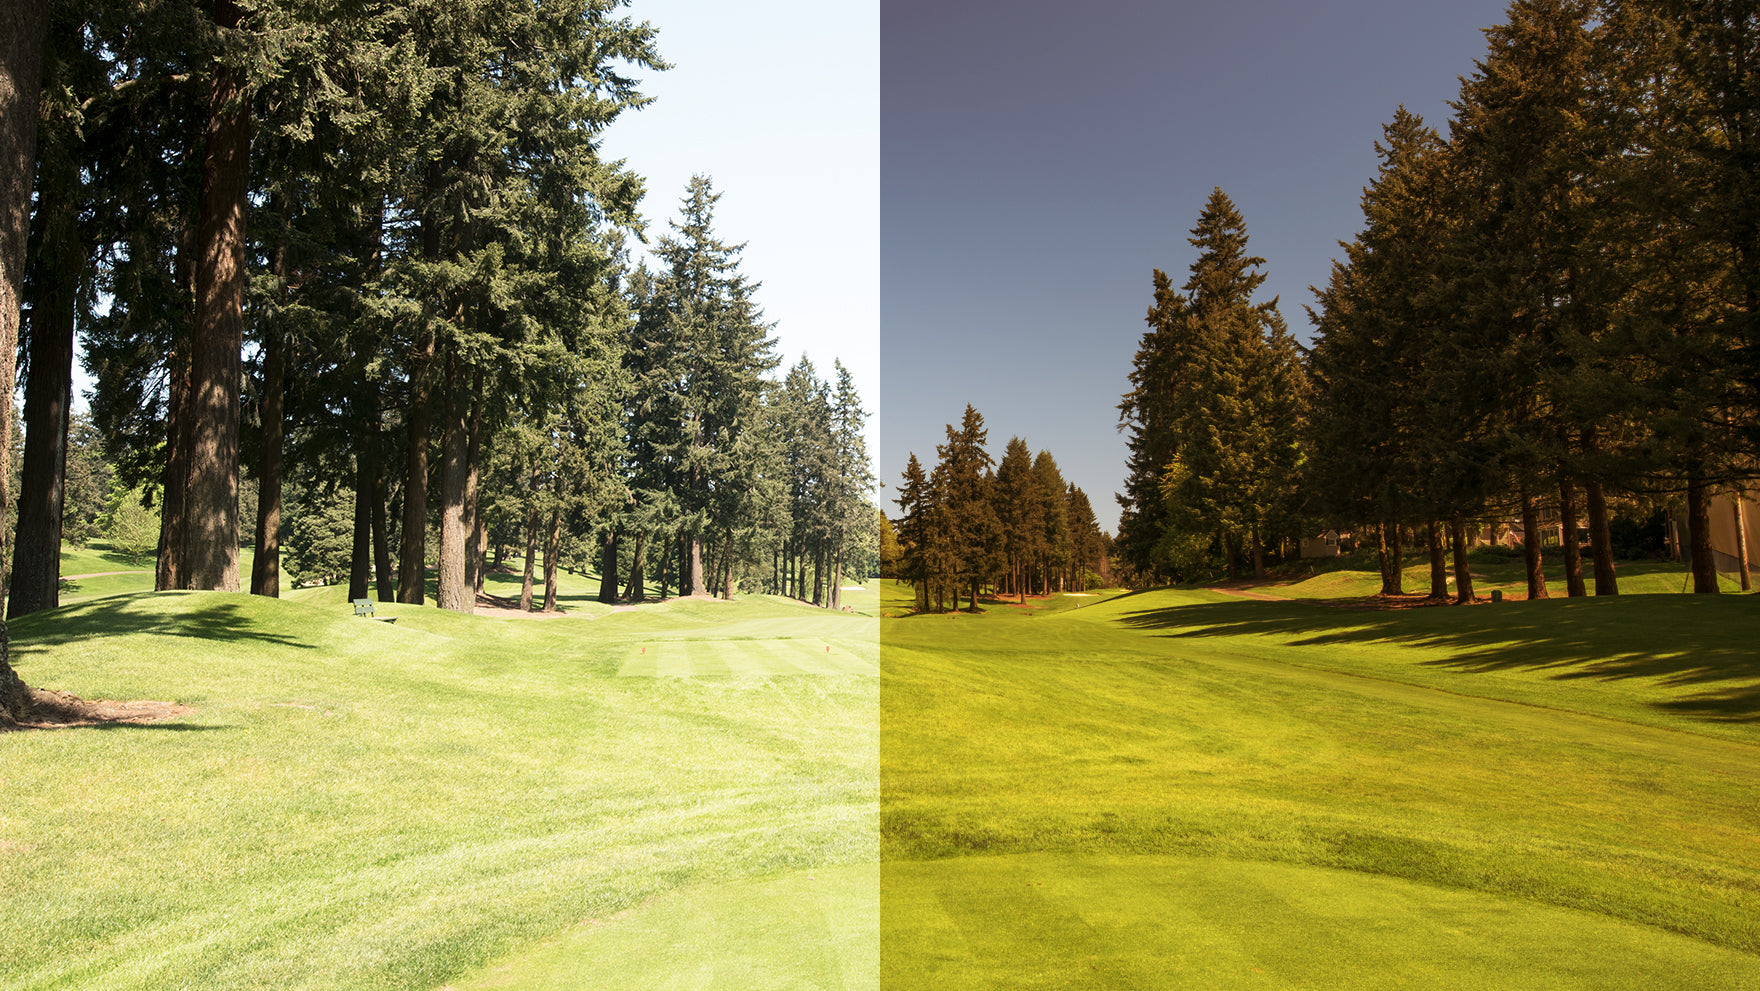 View of a golf course looking through Flare Gold lenses on the right versus no lenses on the left